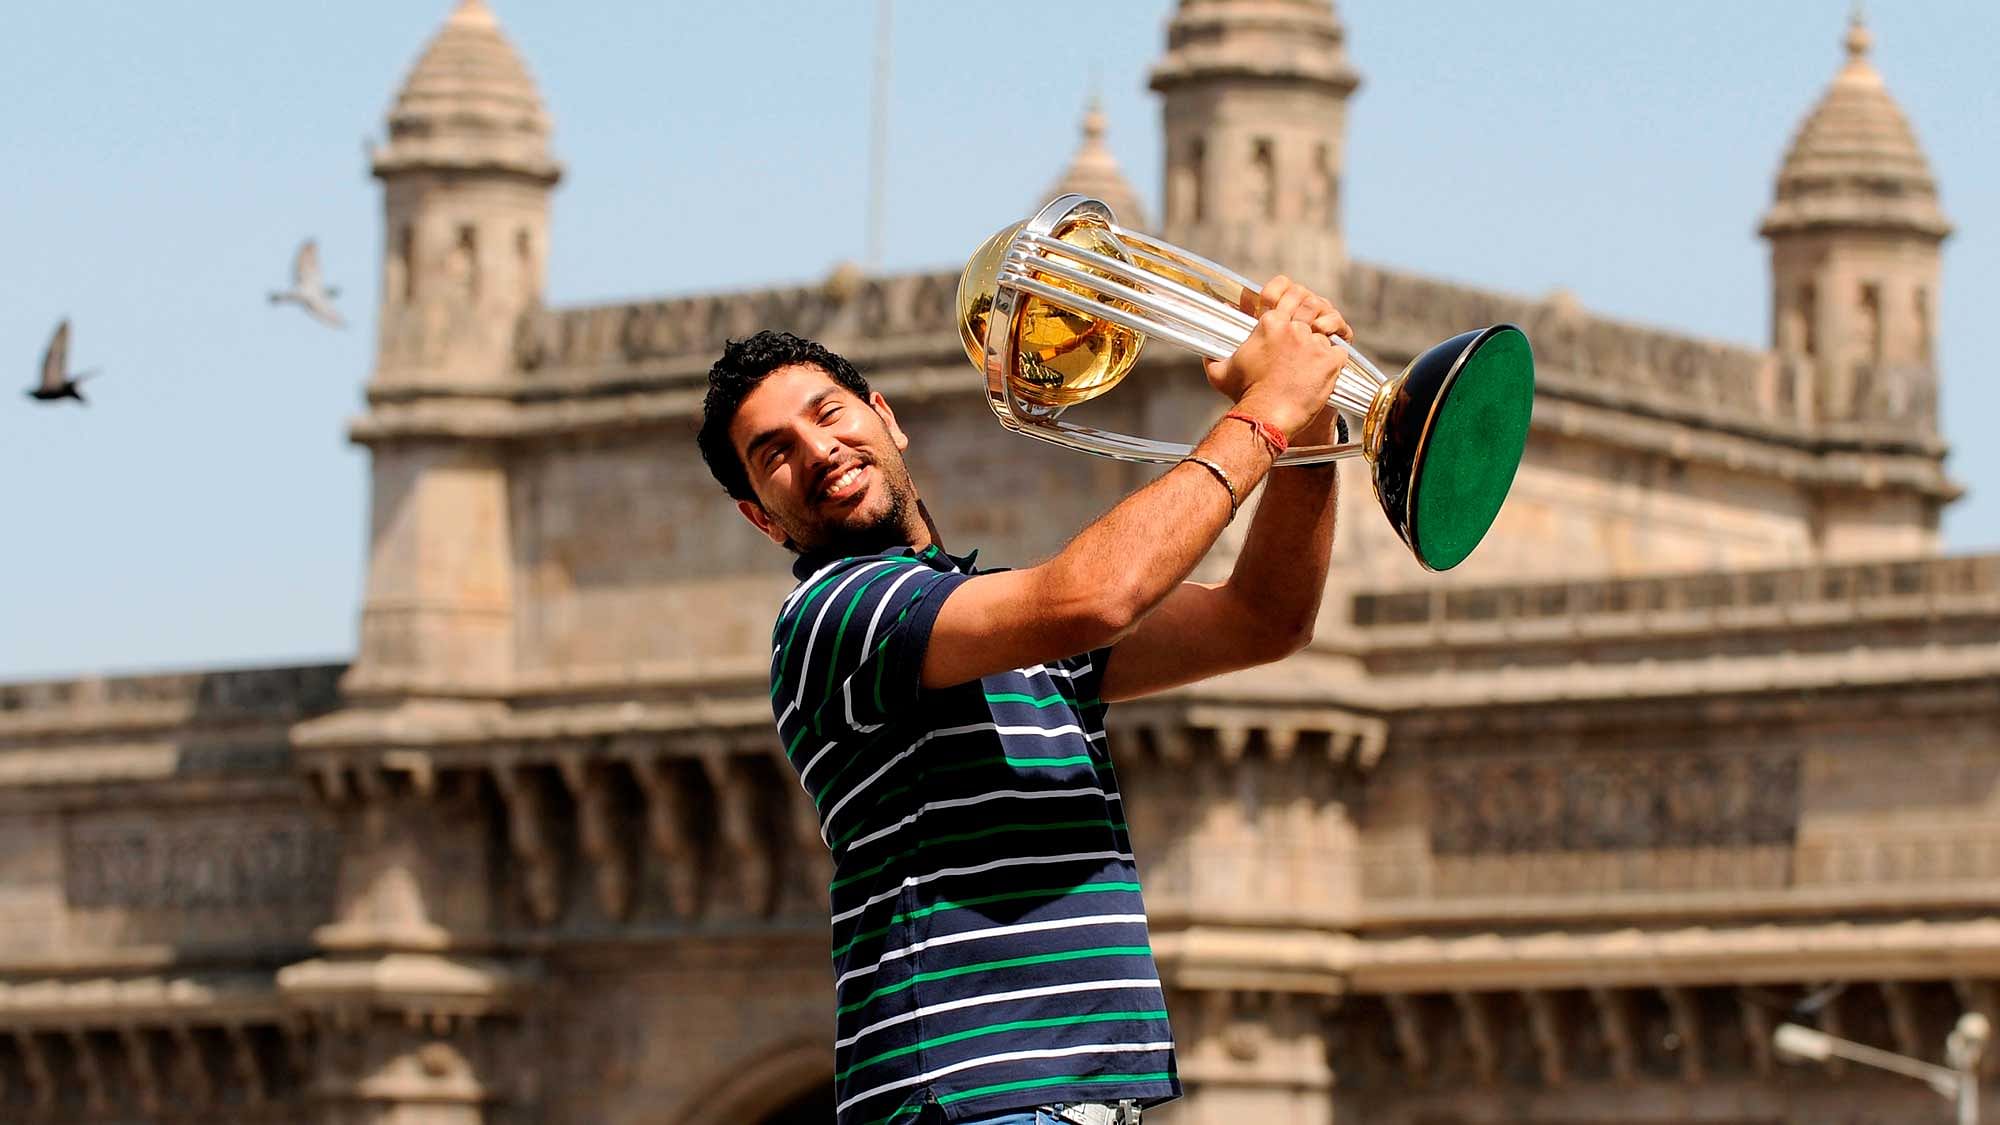 India’s Yuvraj Singh lifts the trophy at the Taj hotel the day after India defeated Sri Lanka in the ICC Cricket World Cup final in Mumbai. (Photo: Reuters)